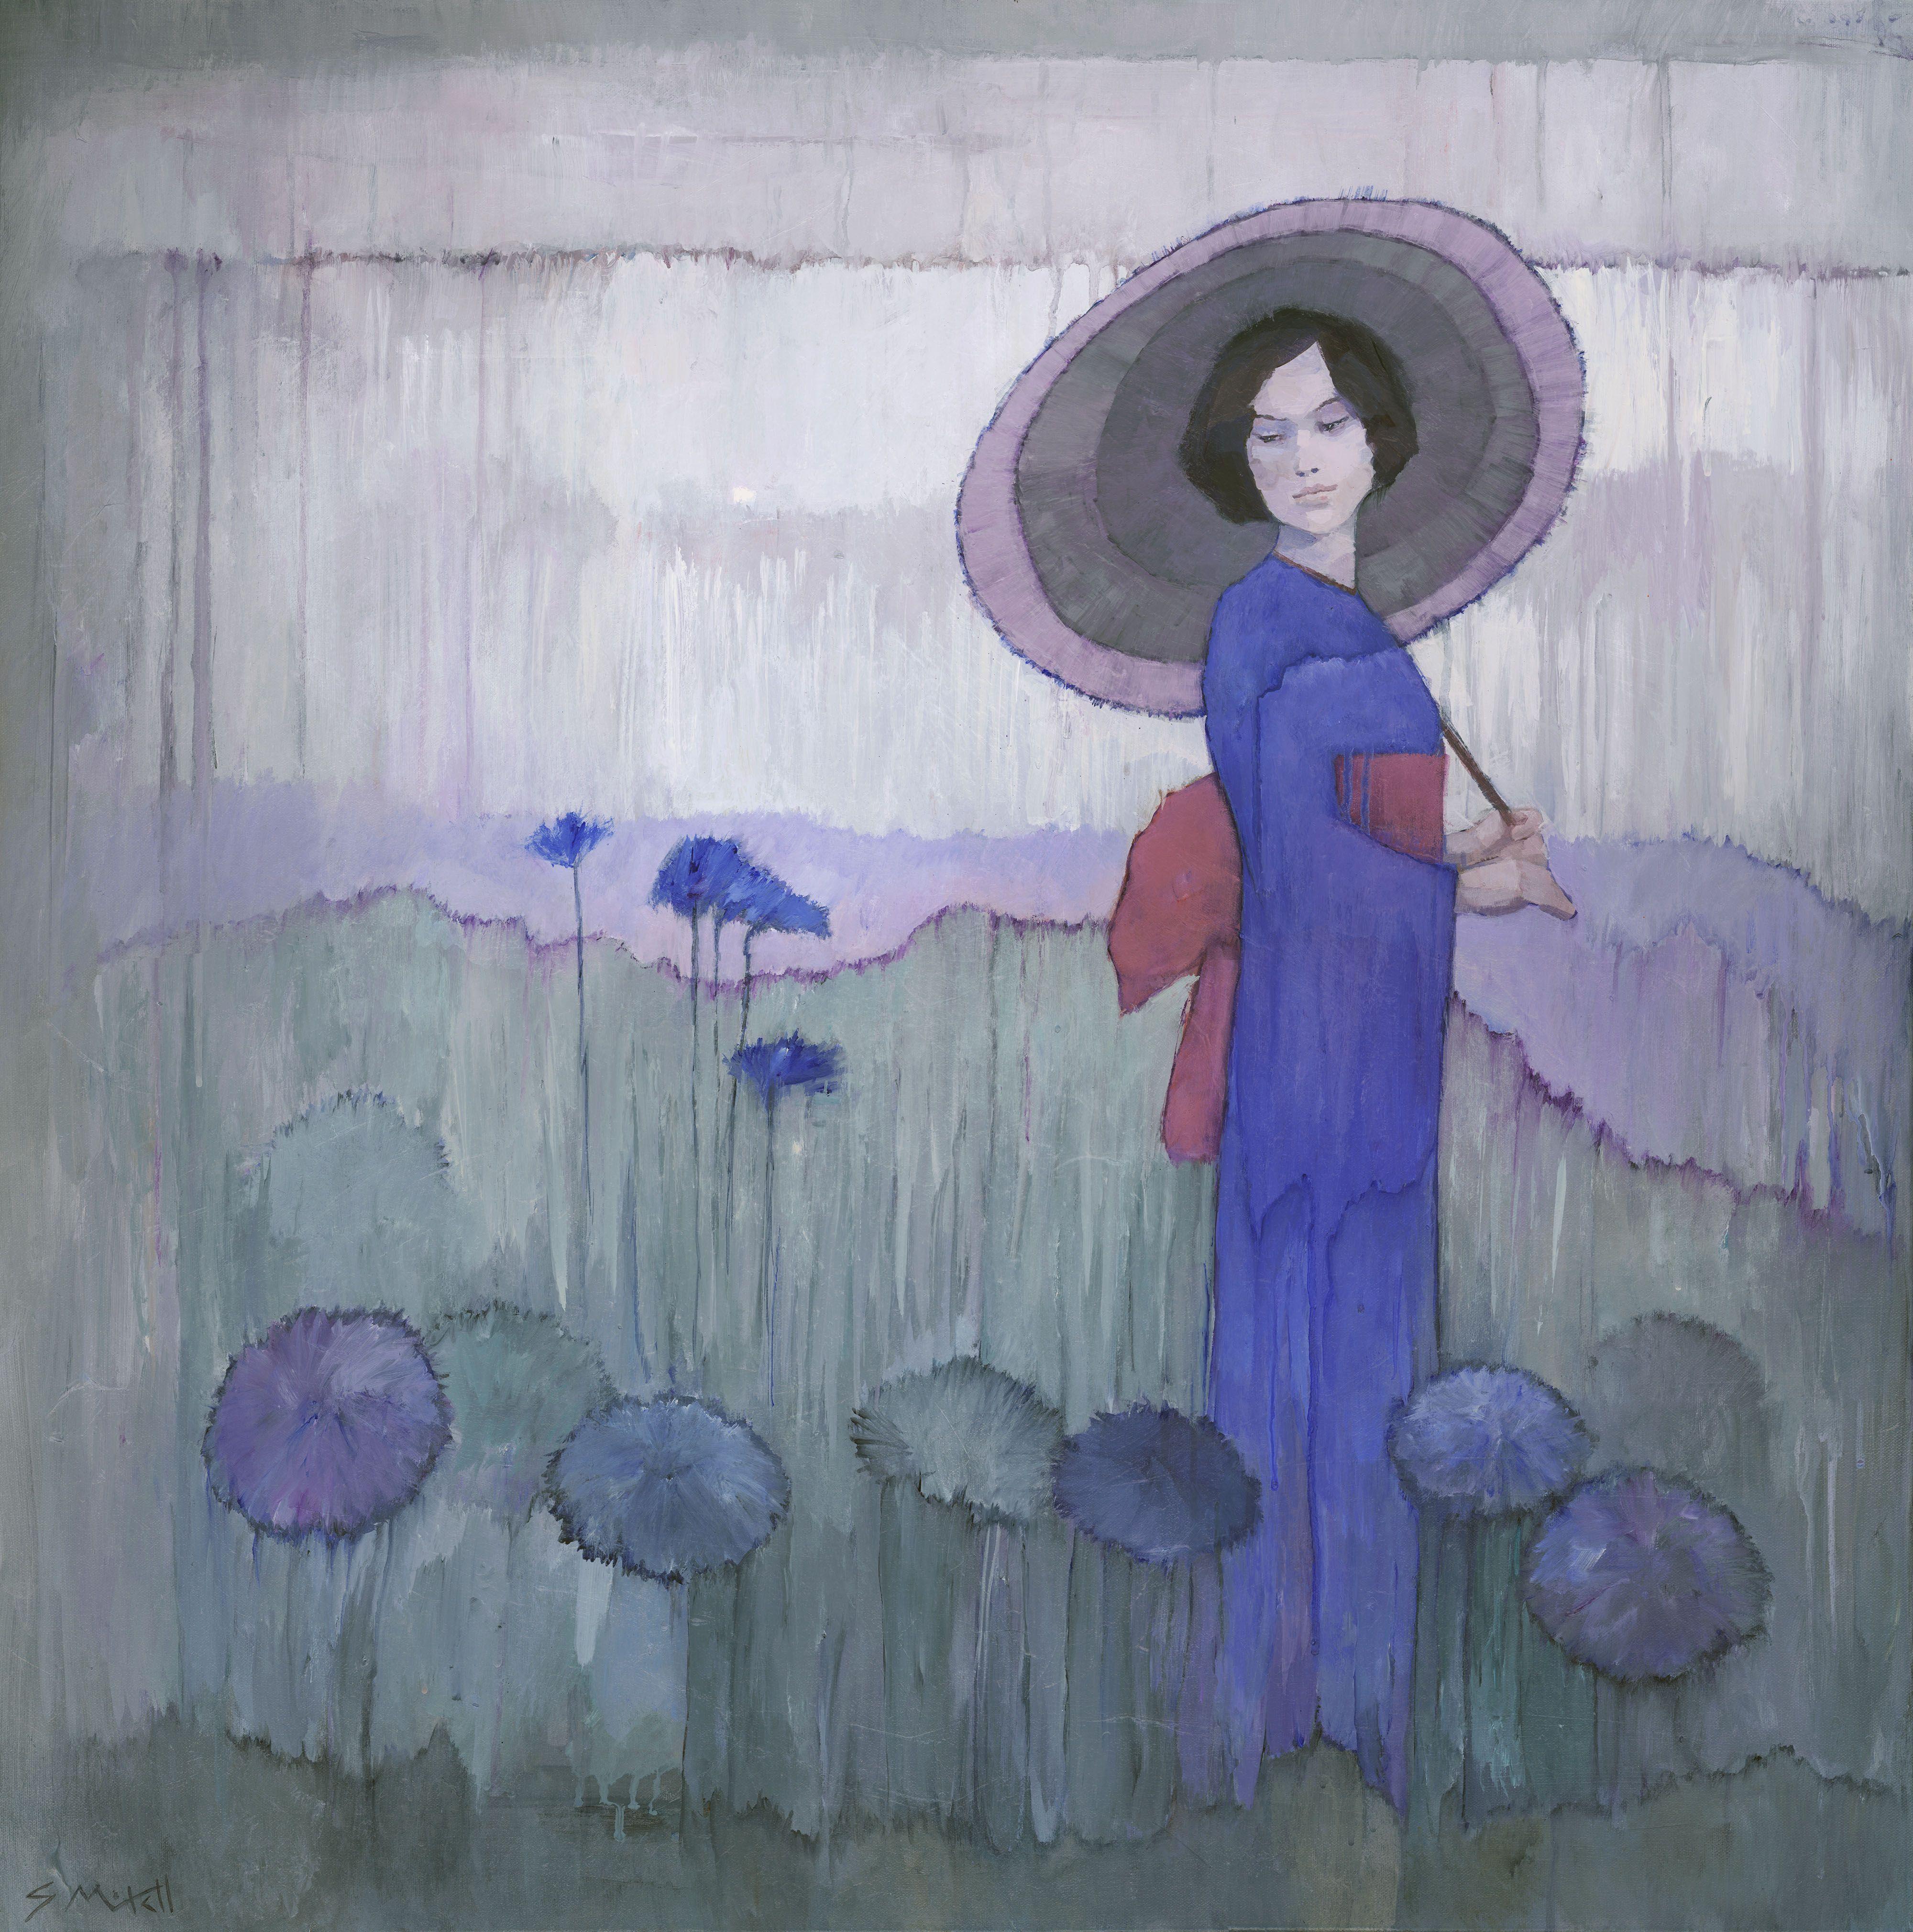 This is an original painting of a Japanese lady dressed in a Kimono walking through a garden. I was influenced by elements of Japanese art as well as the poetic symbolist artists. The painting has a melancholic but peaceful mood, with a muted purple